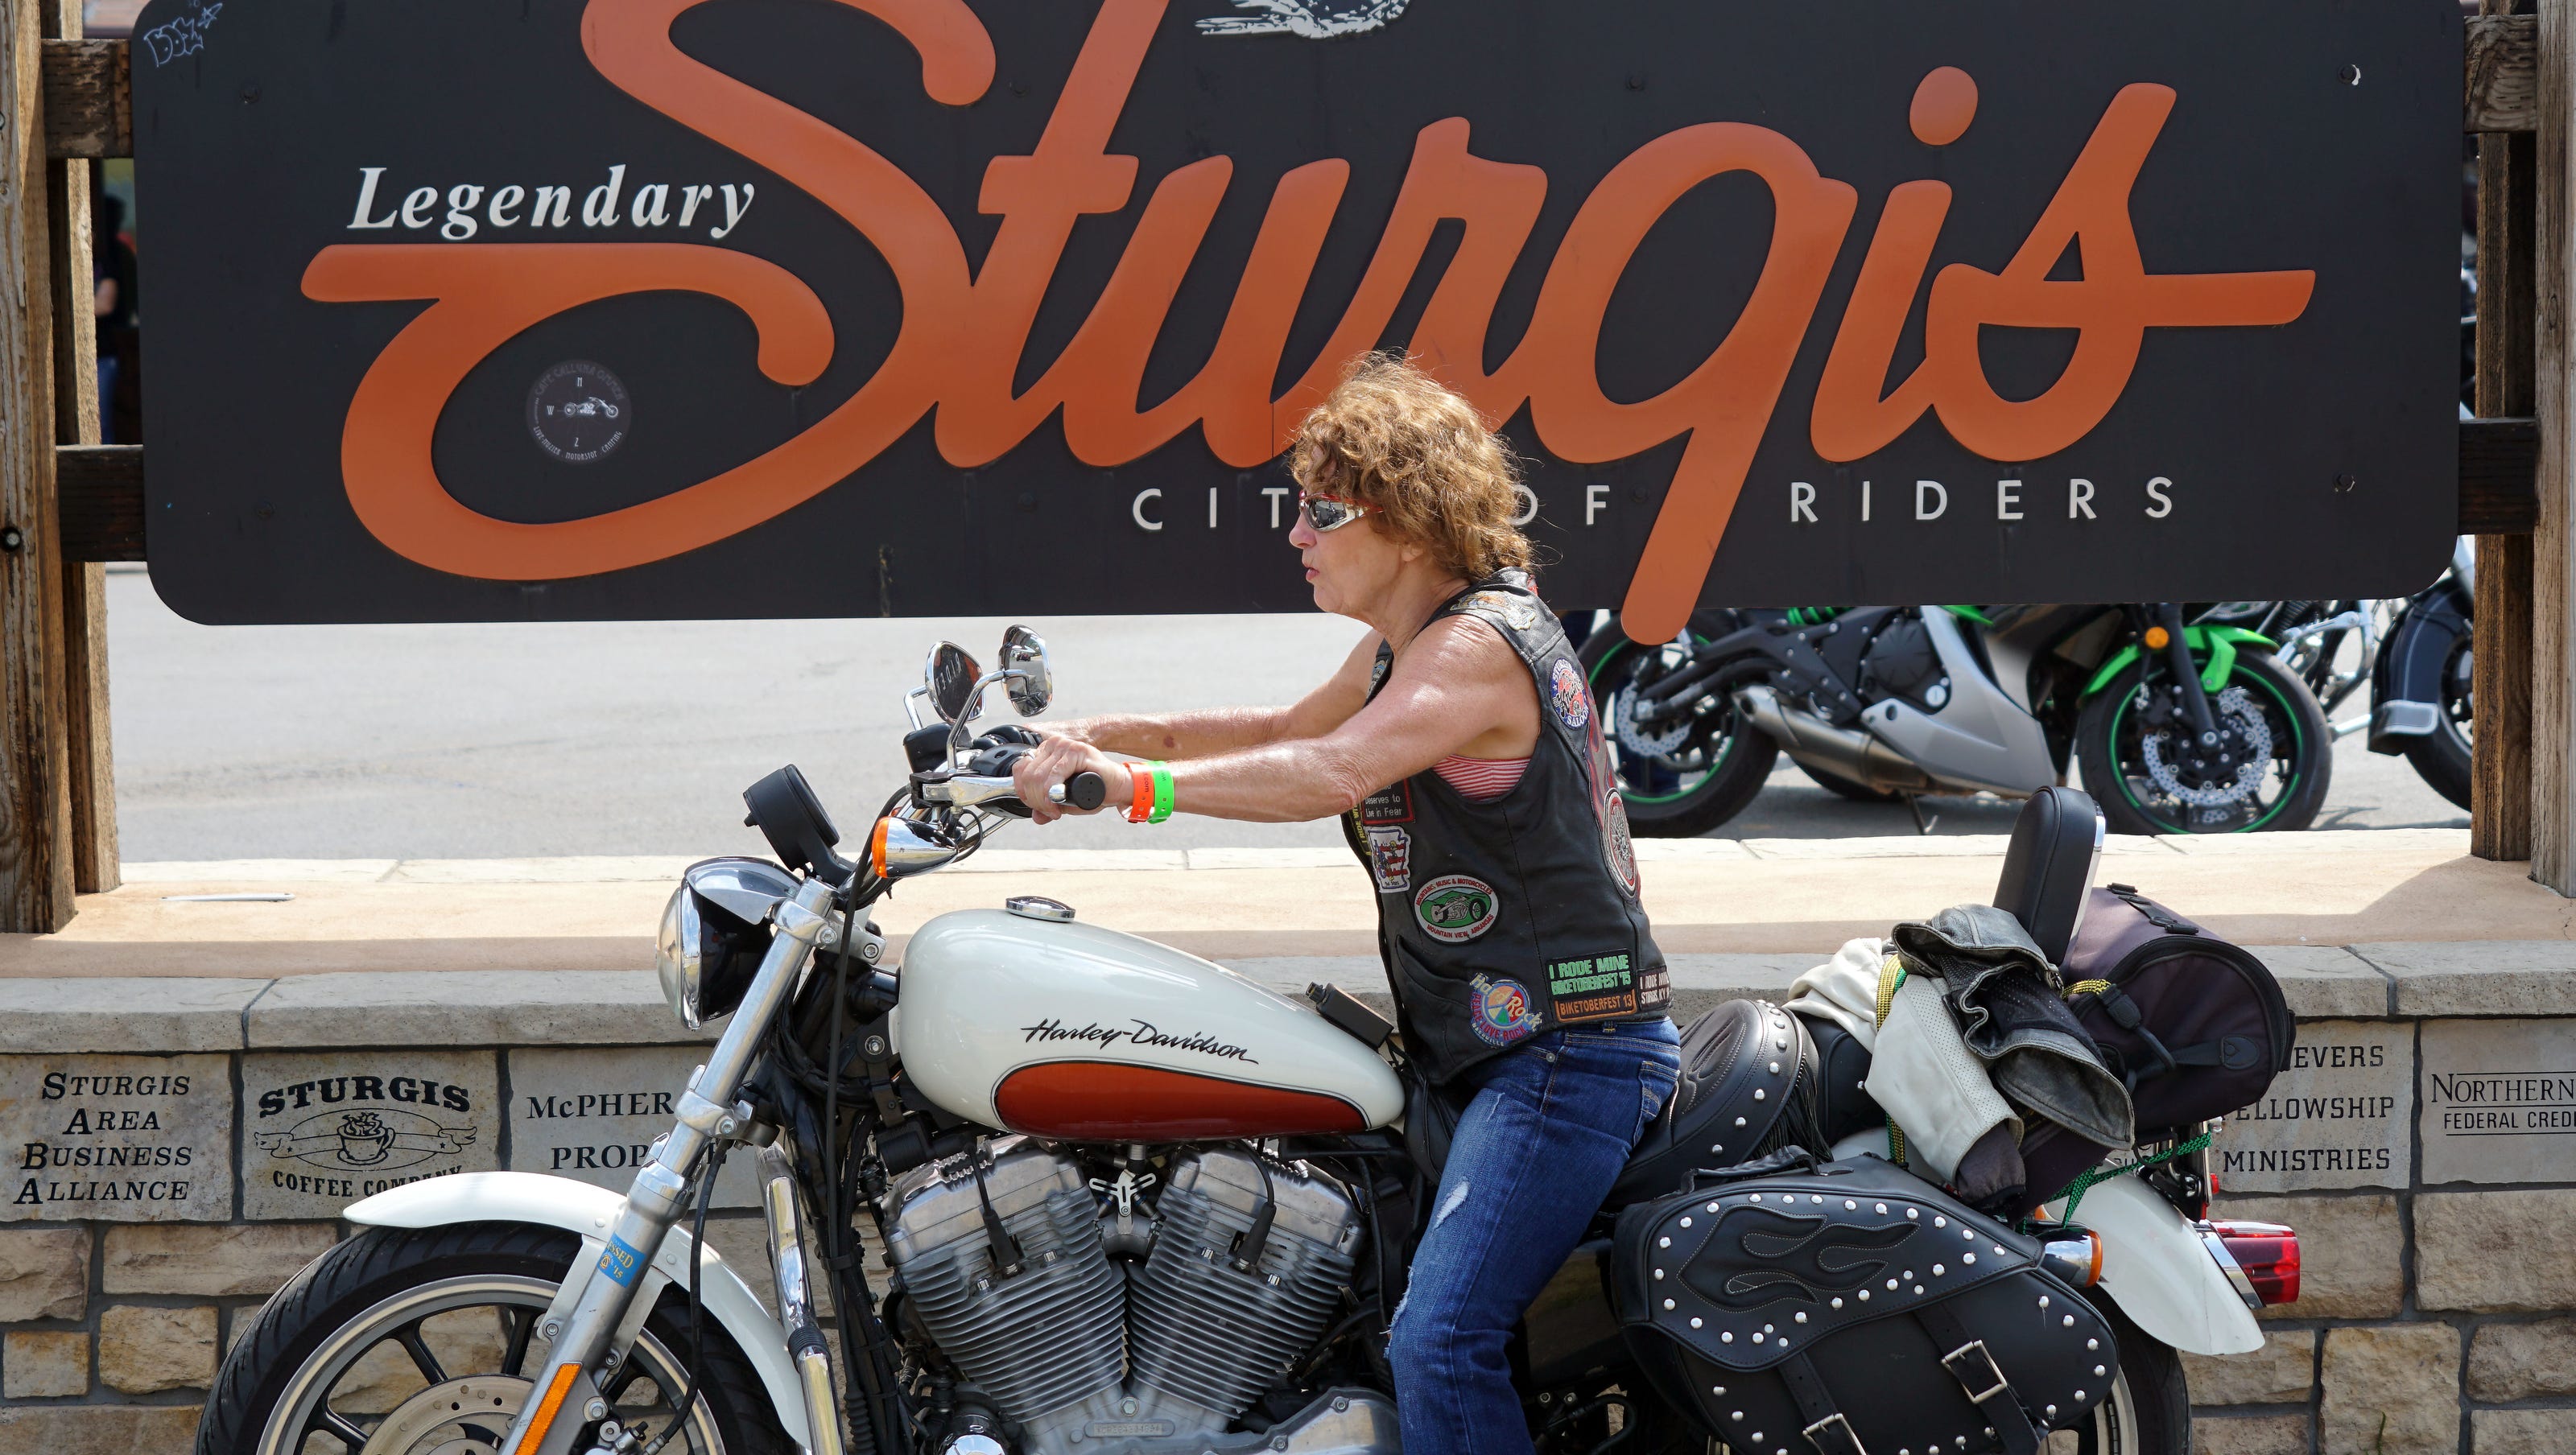 Sturgis 2018 Motorcycle Rally Is Worlds Largest Motorcycle Event 